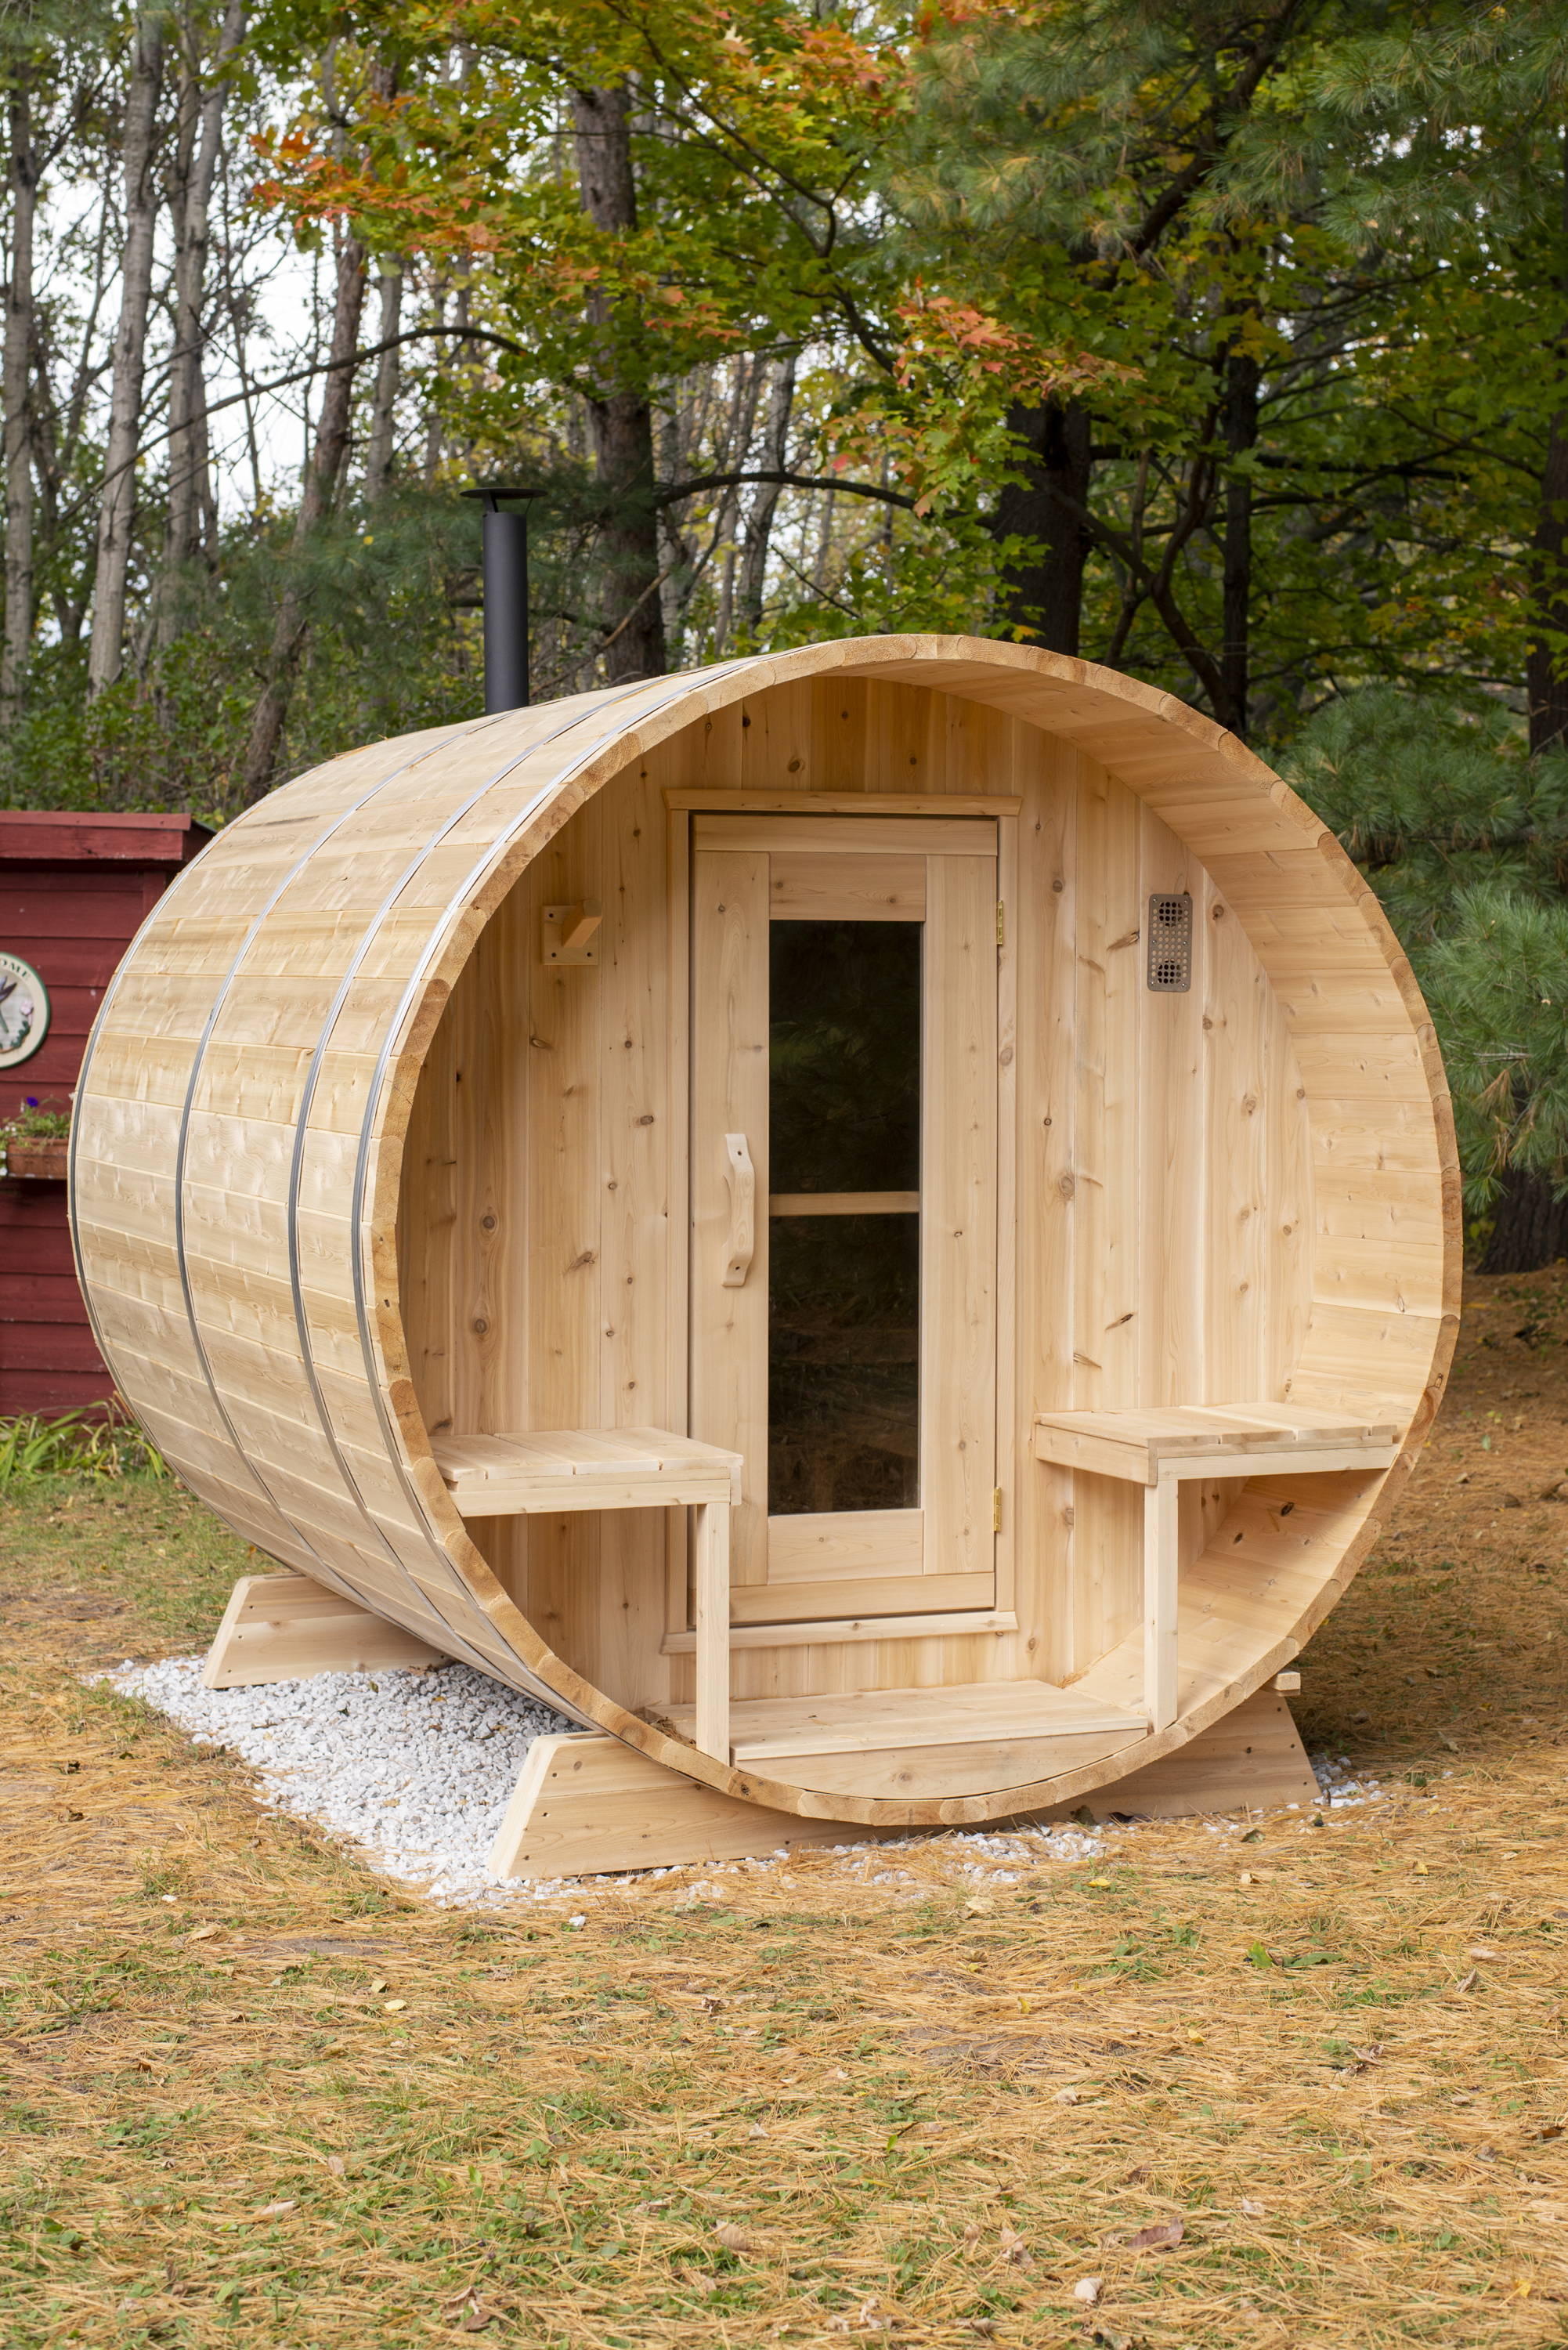 Barrel sauna on gravel, in wooded area